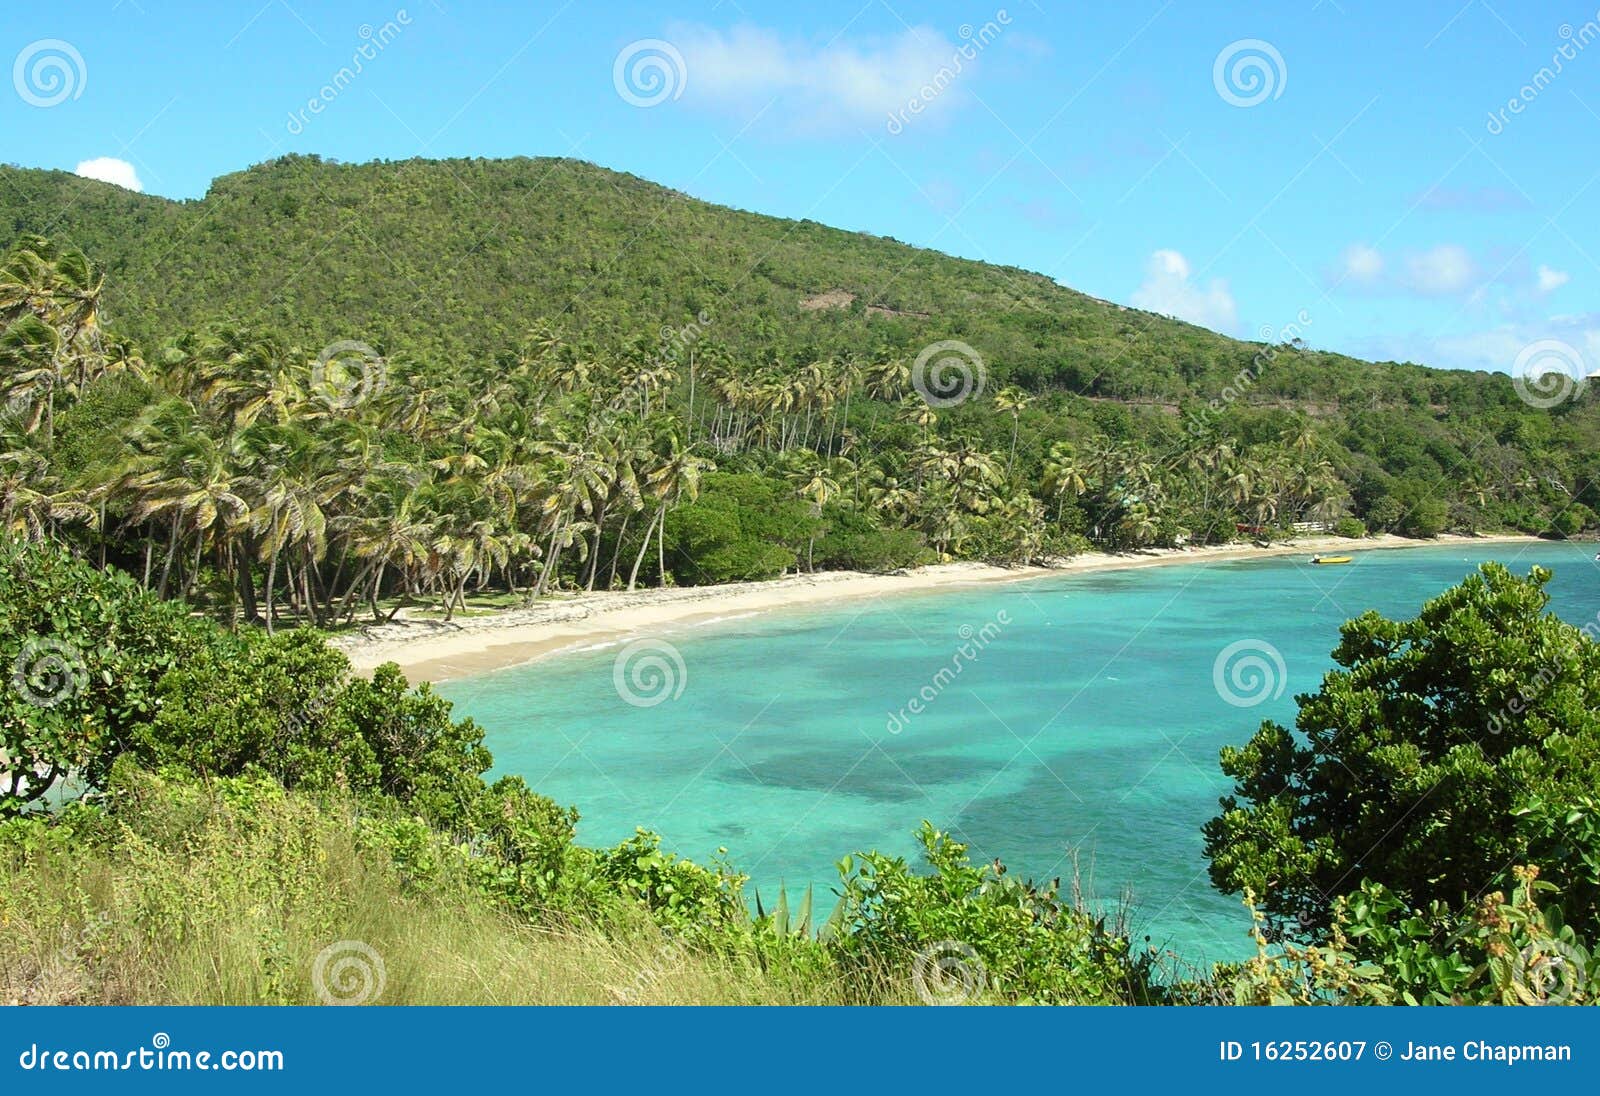 Secluded beach on Bequia stock image. Image of scenic - 16252607